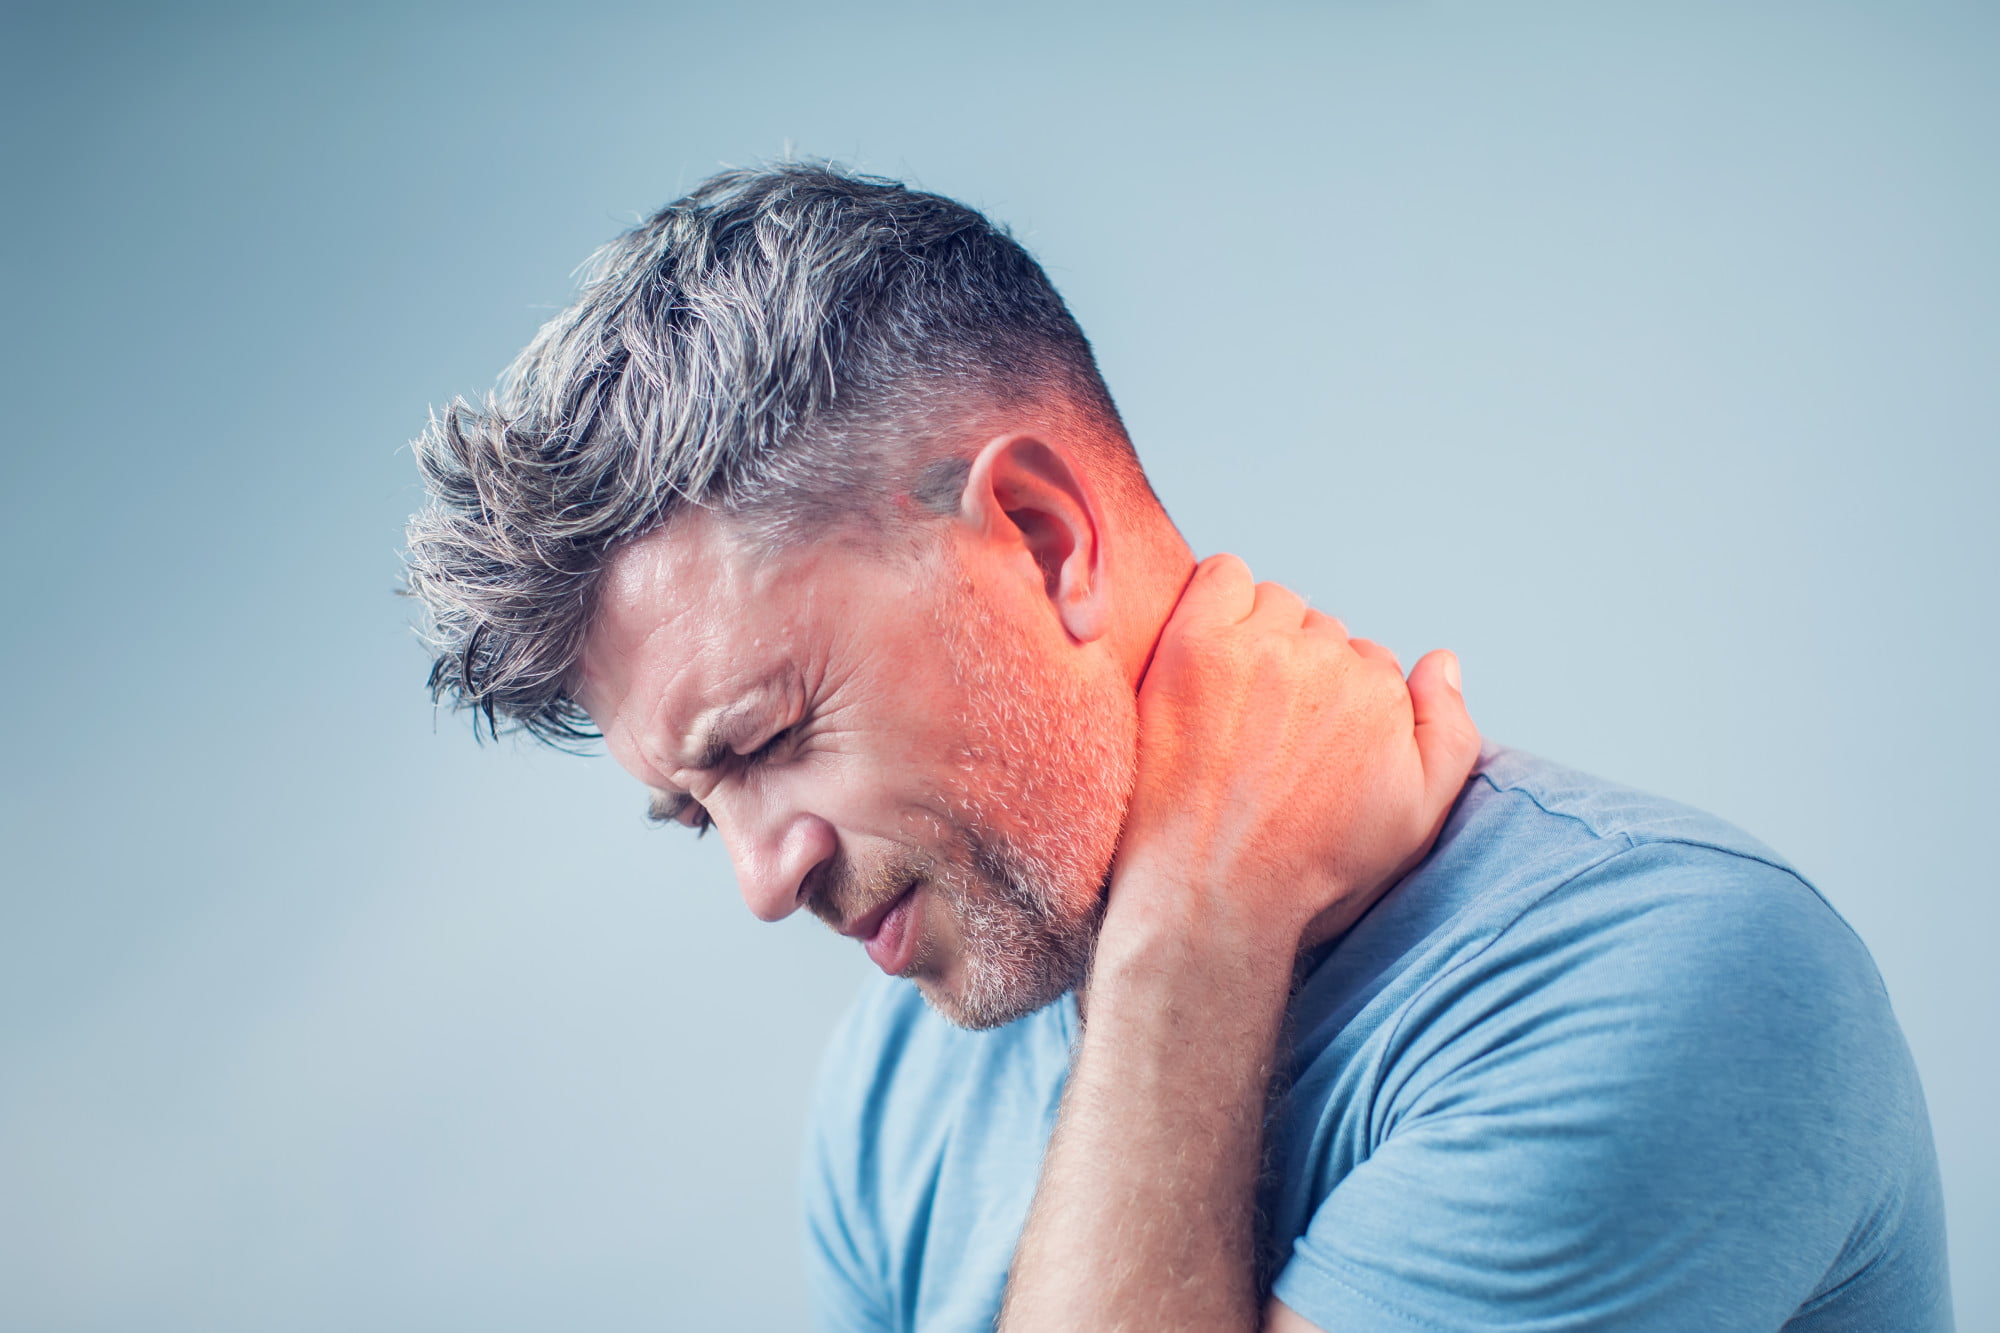 Did you know that not all neck injuries are created equal these days? Here are the many different types of neck injuries that doctors can diagnose today.